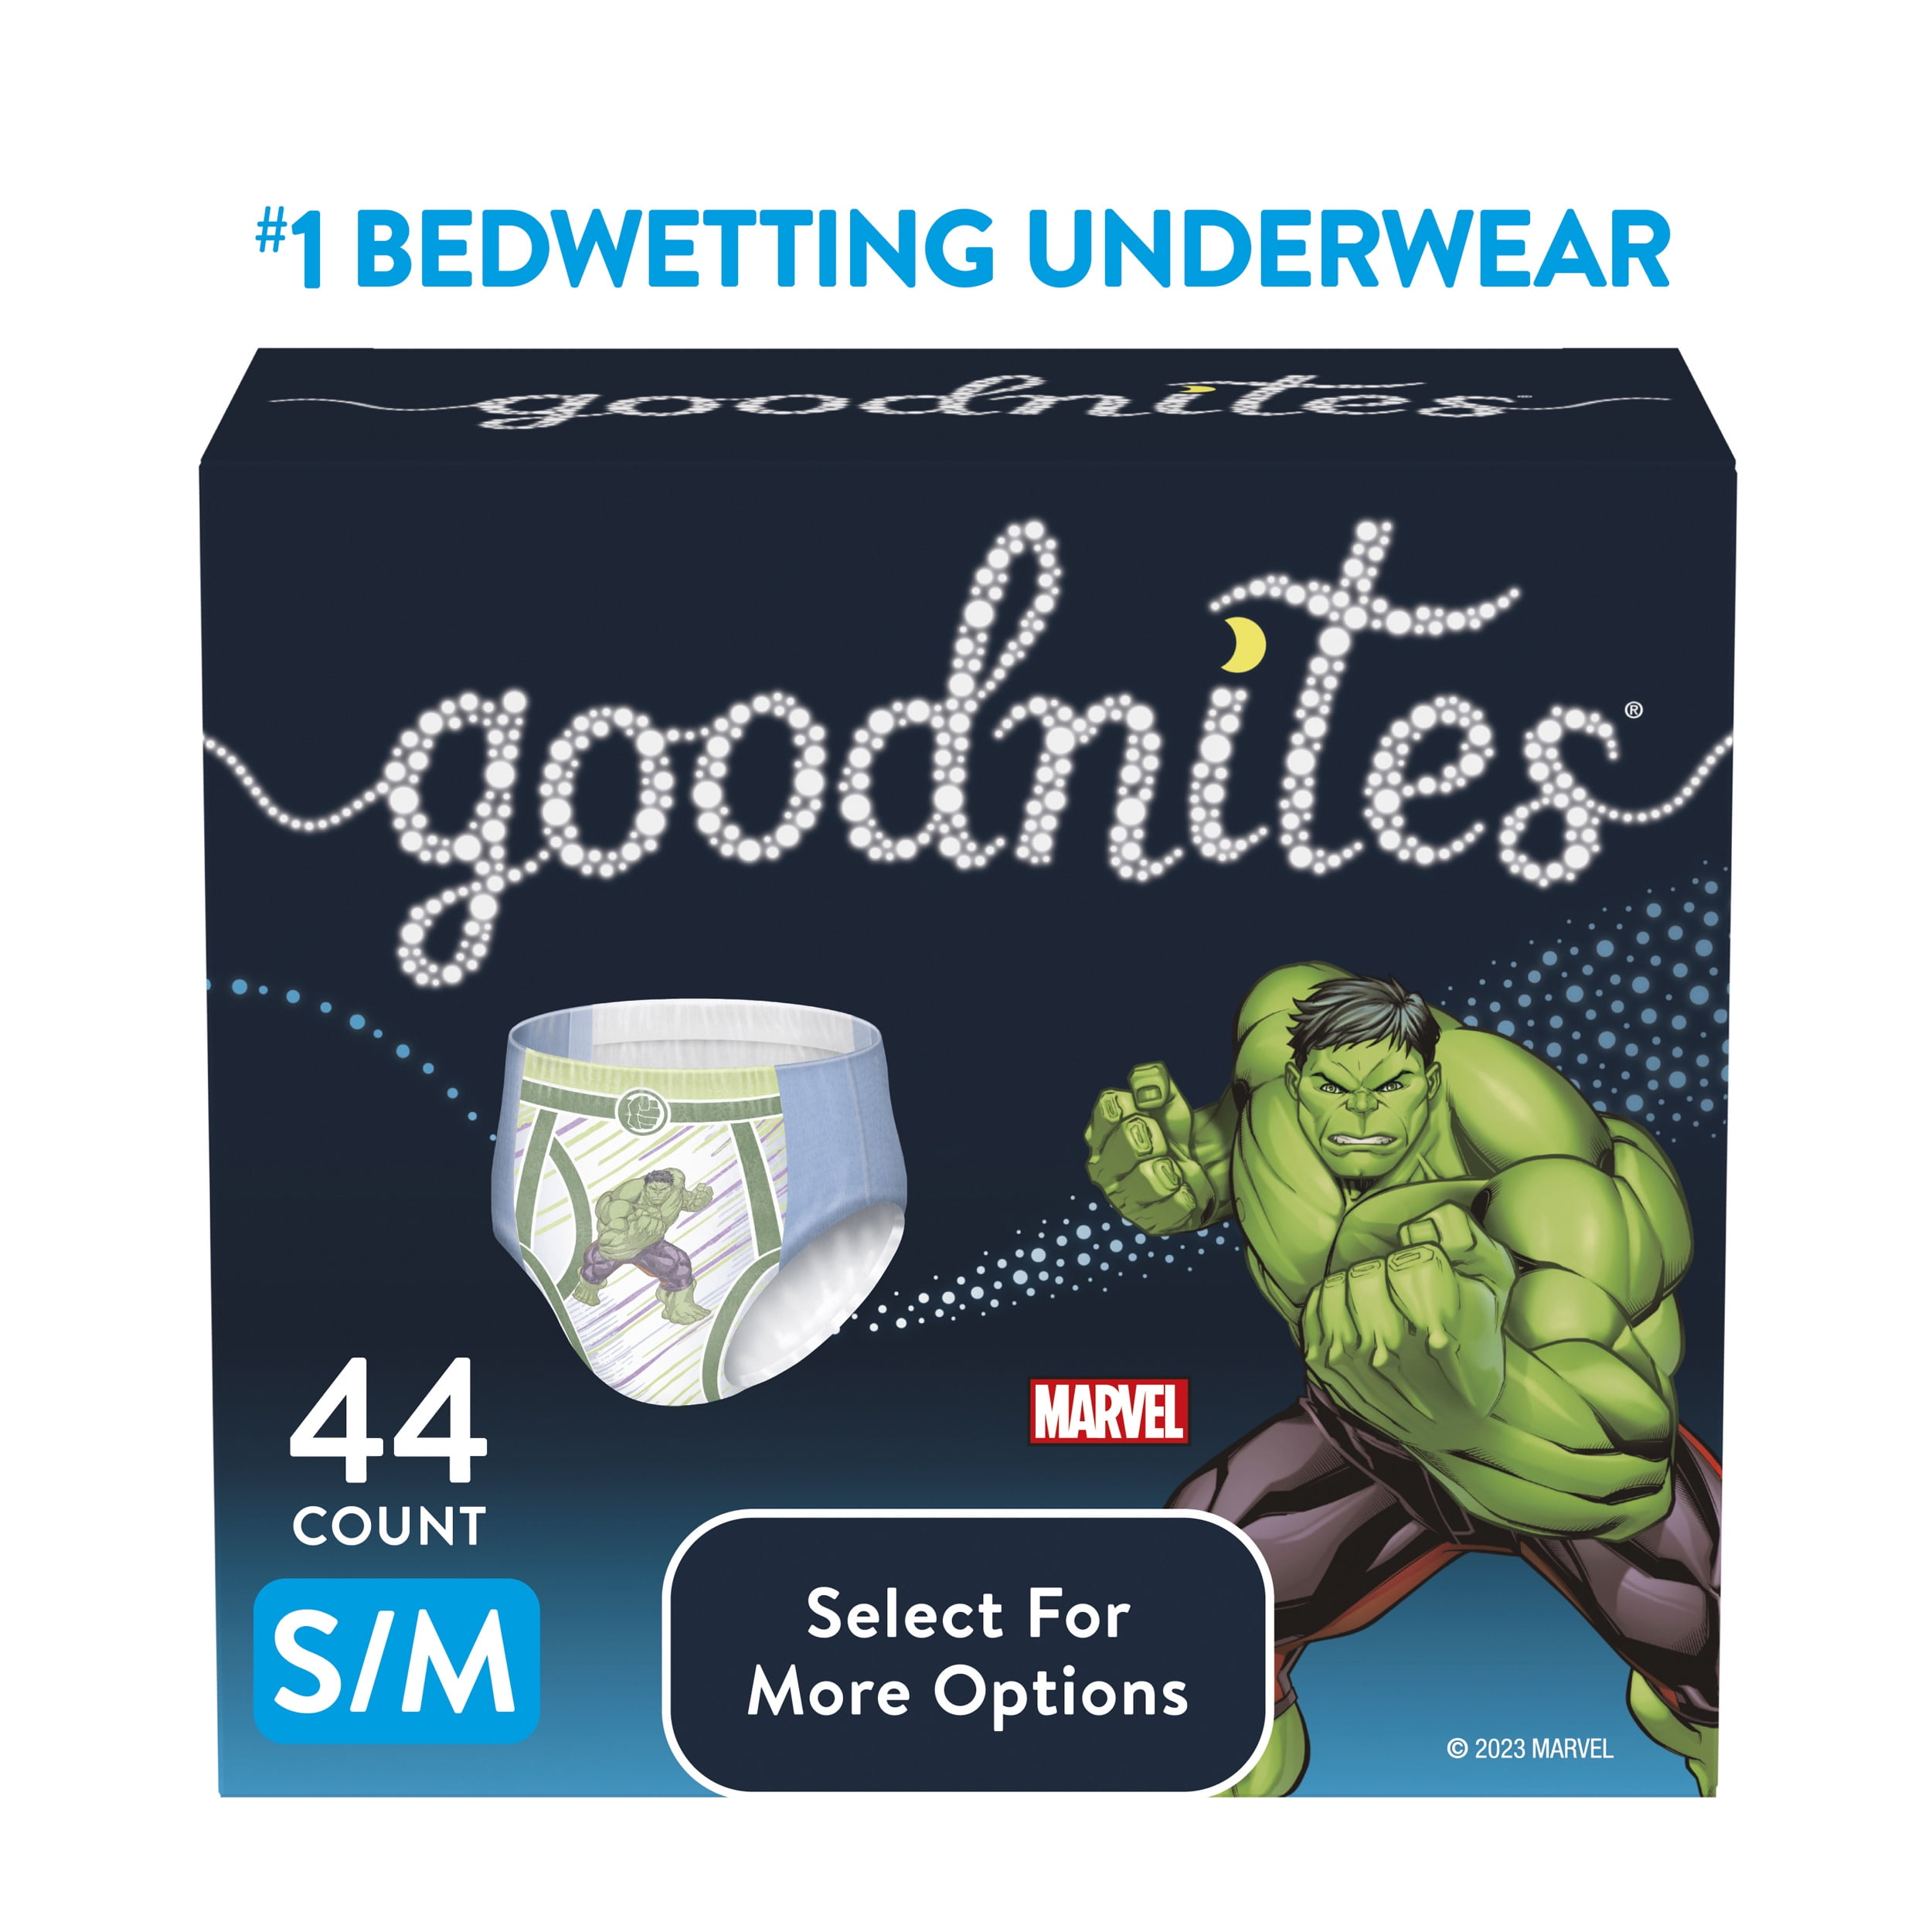 Goodnites Nighttime Bedwetting Underwear for Boys, S/M, 44 Ct (Select for  More Options) 